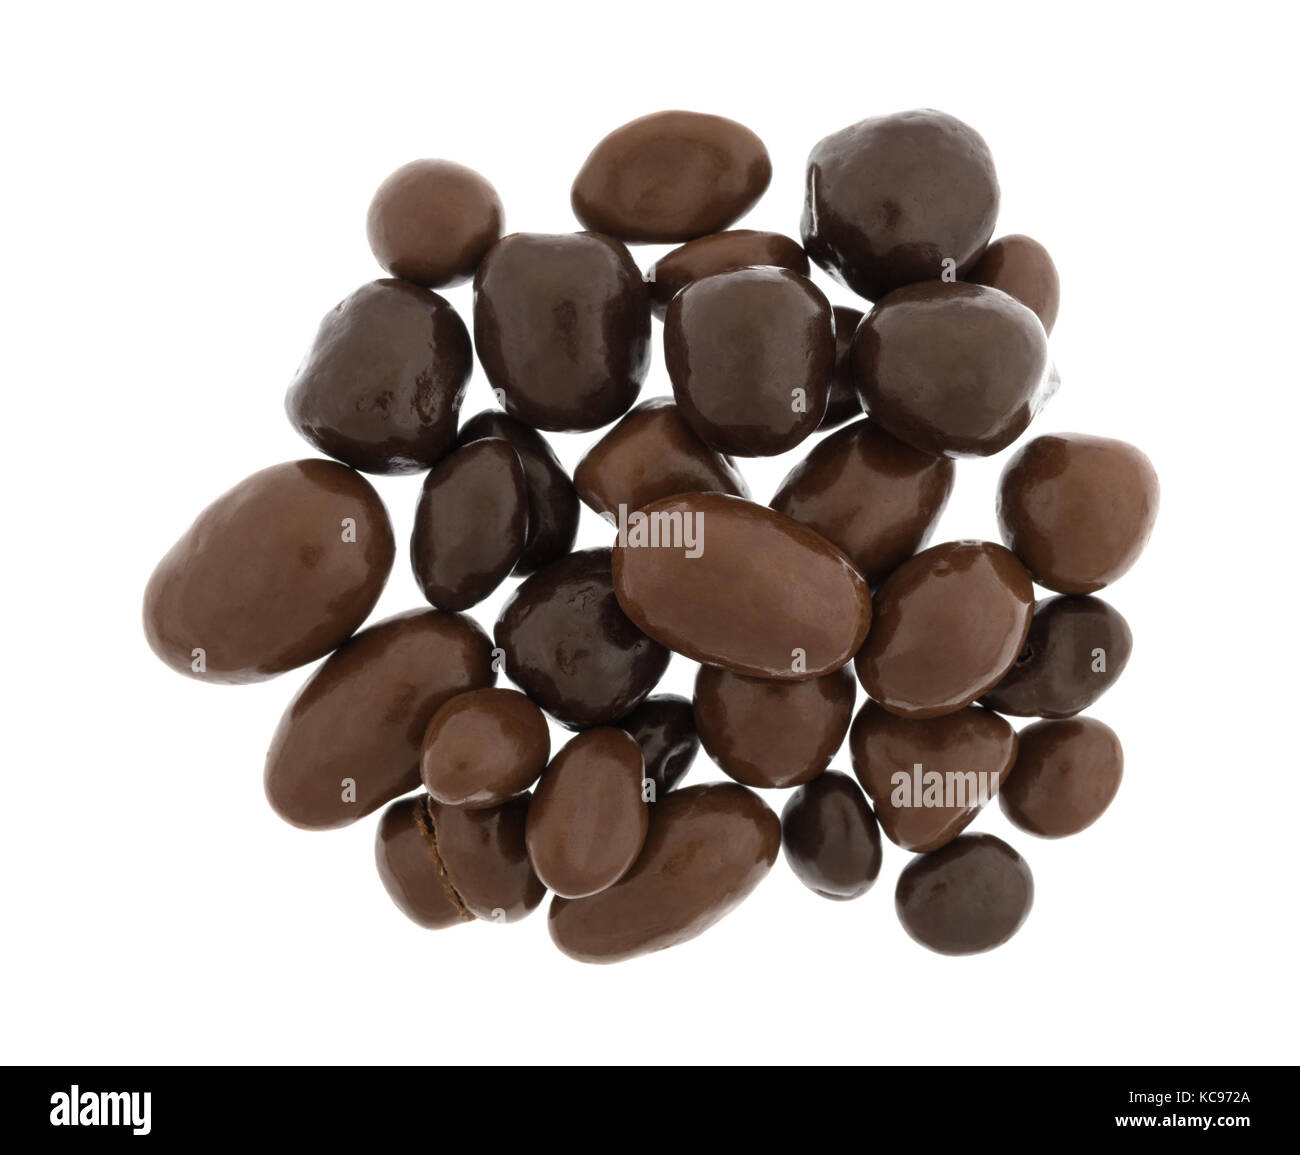 Top view of a portion of bridge mix chocolate candy isolated on a white background. Stock Photo